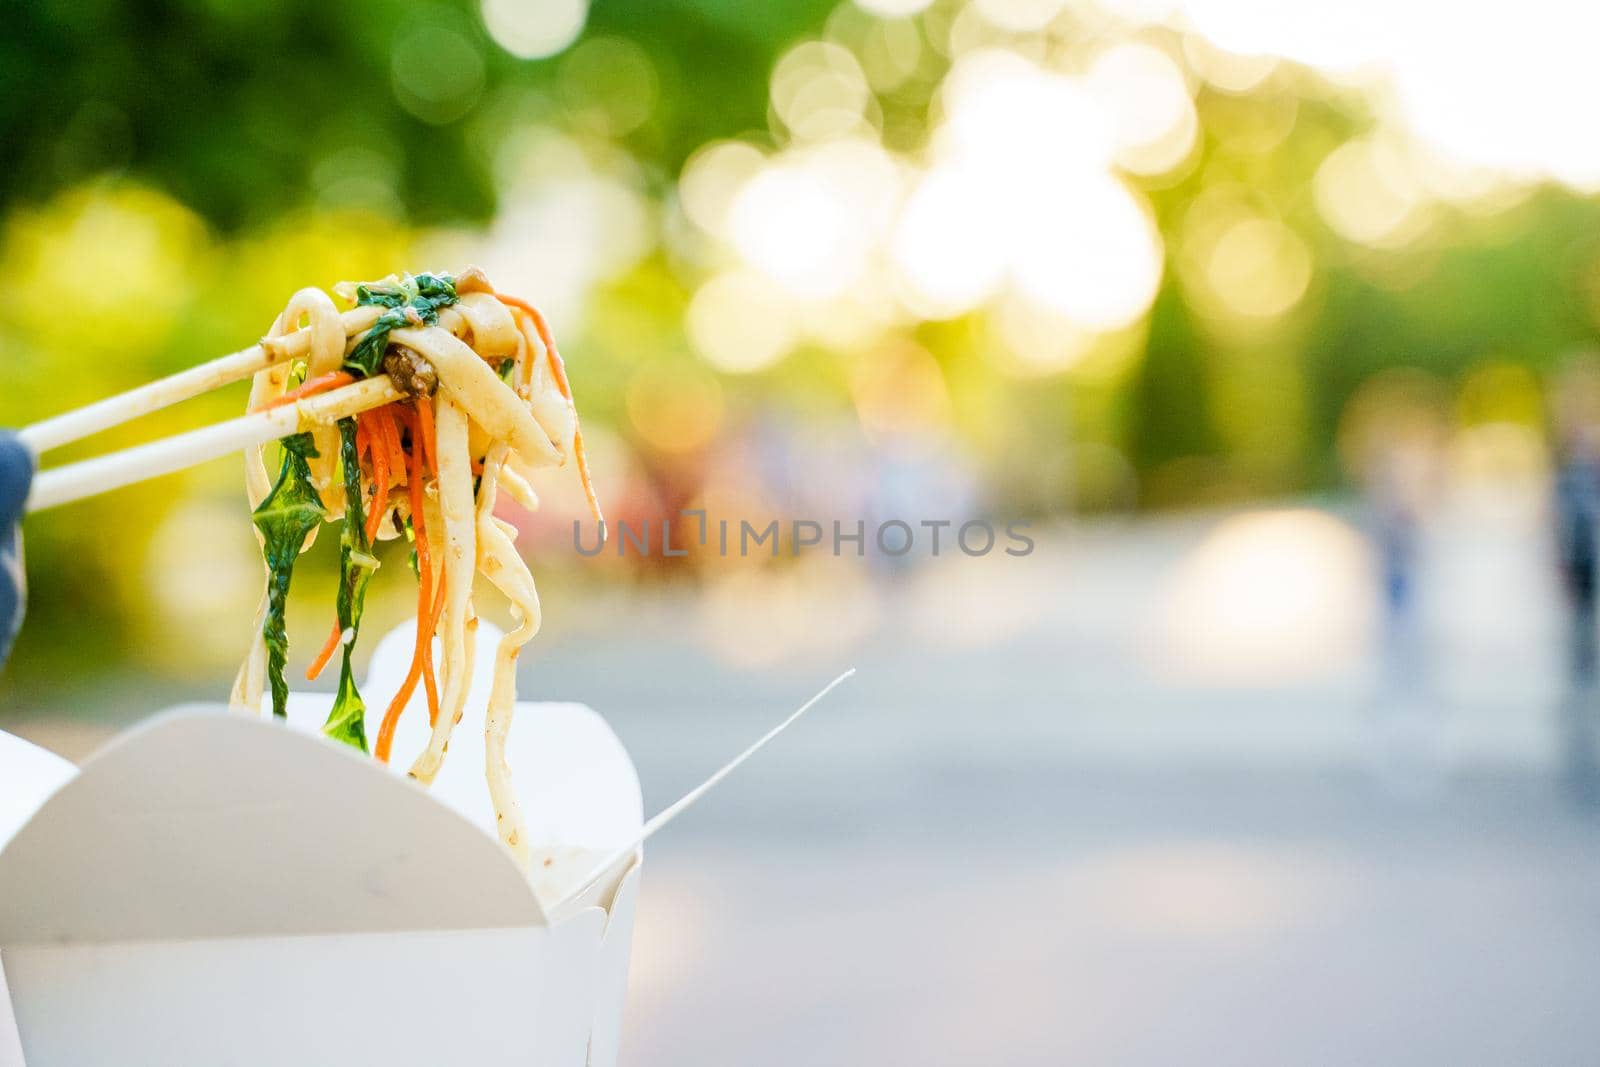 Closeup udon noddles on blurred background gets out of the white box. Advertise for Japanese restaurant delivery. Stay at home and eat udon noodles.